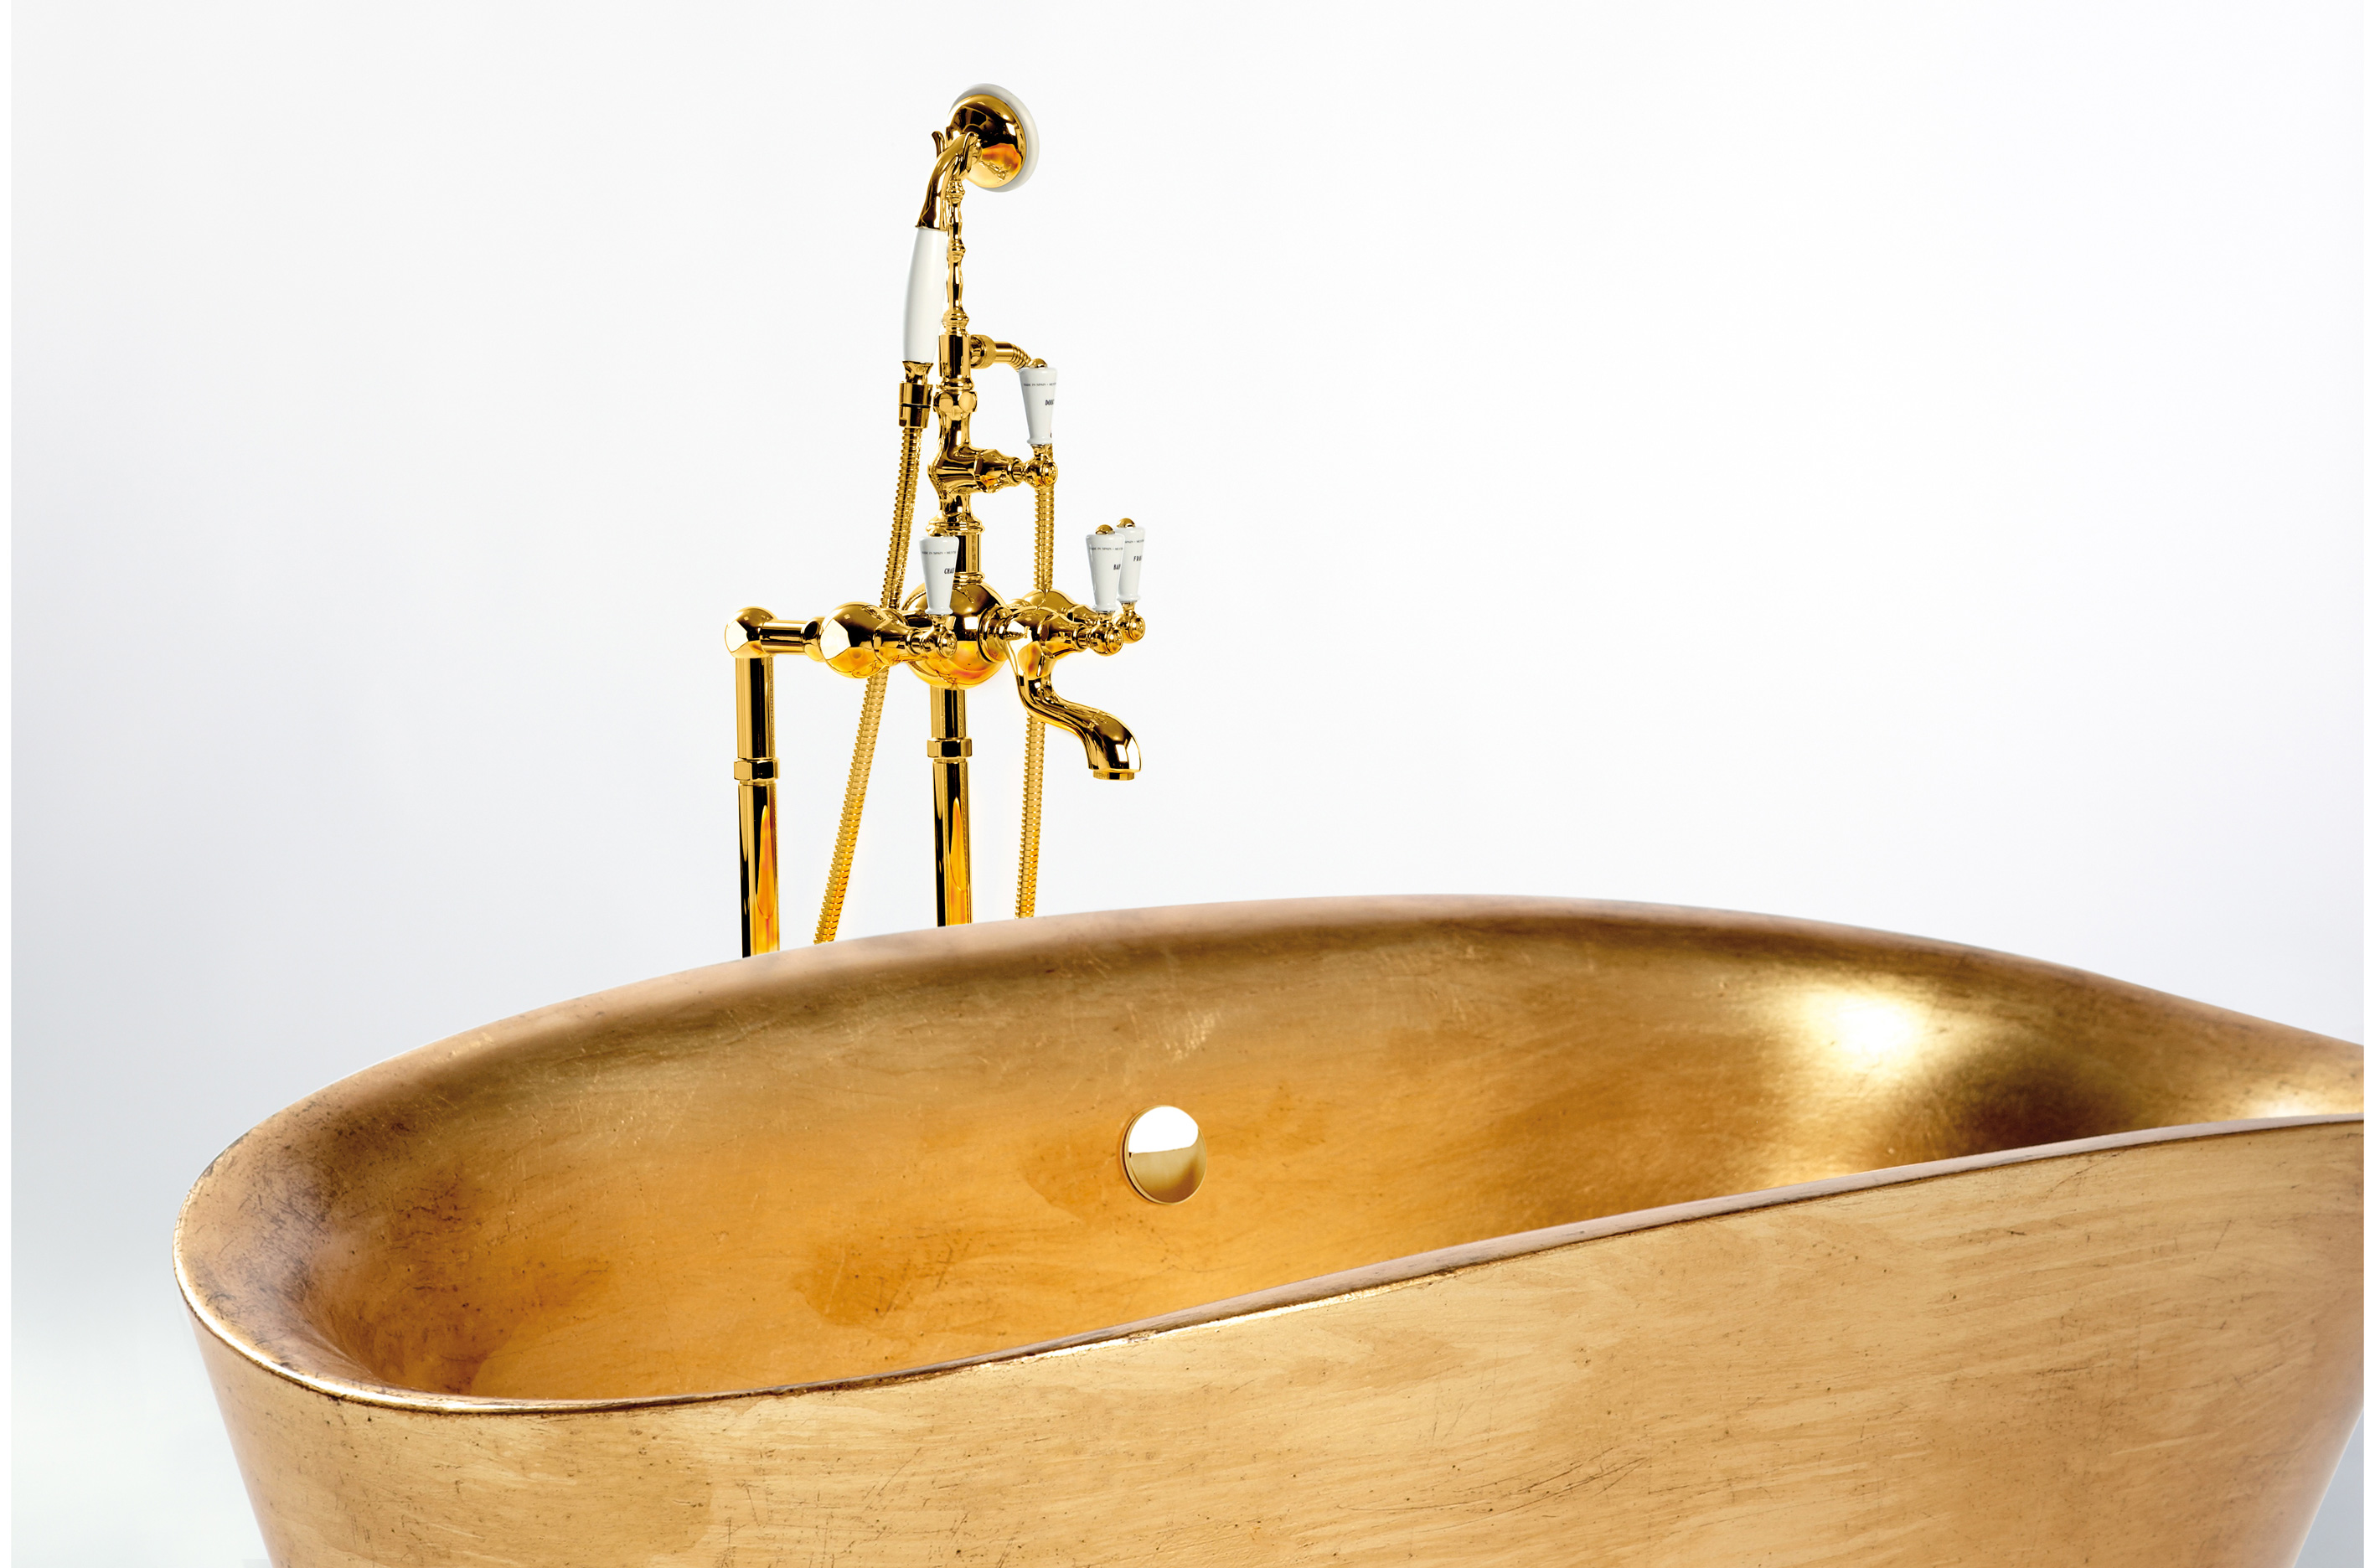 Mestre Artistic Faucets And Luxury Handles Continues The Expansion